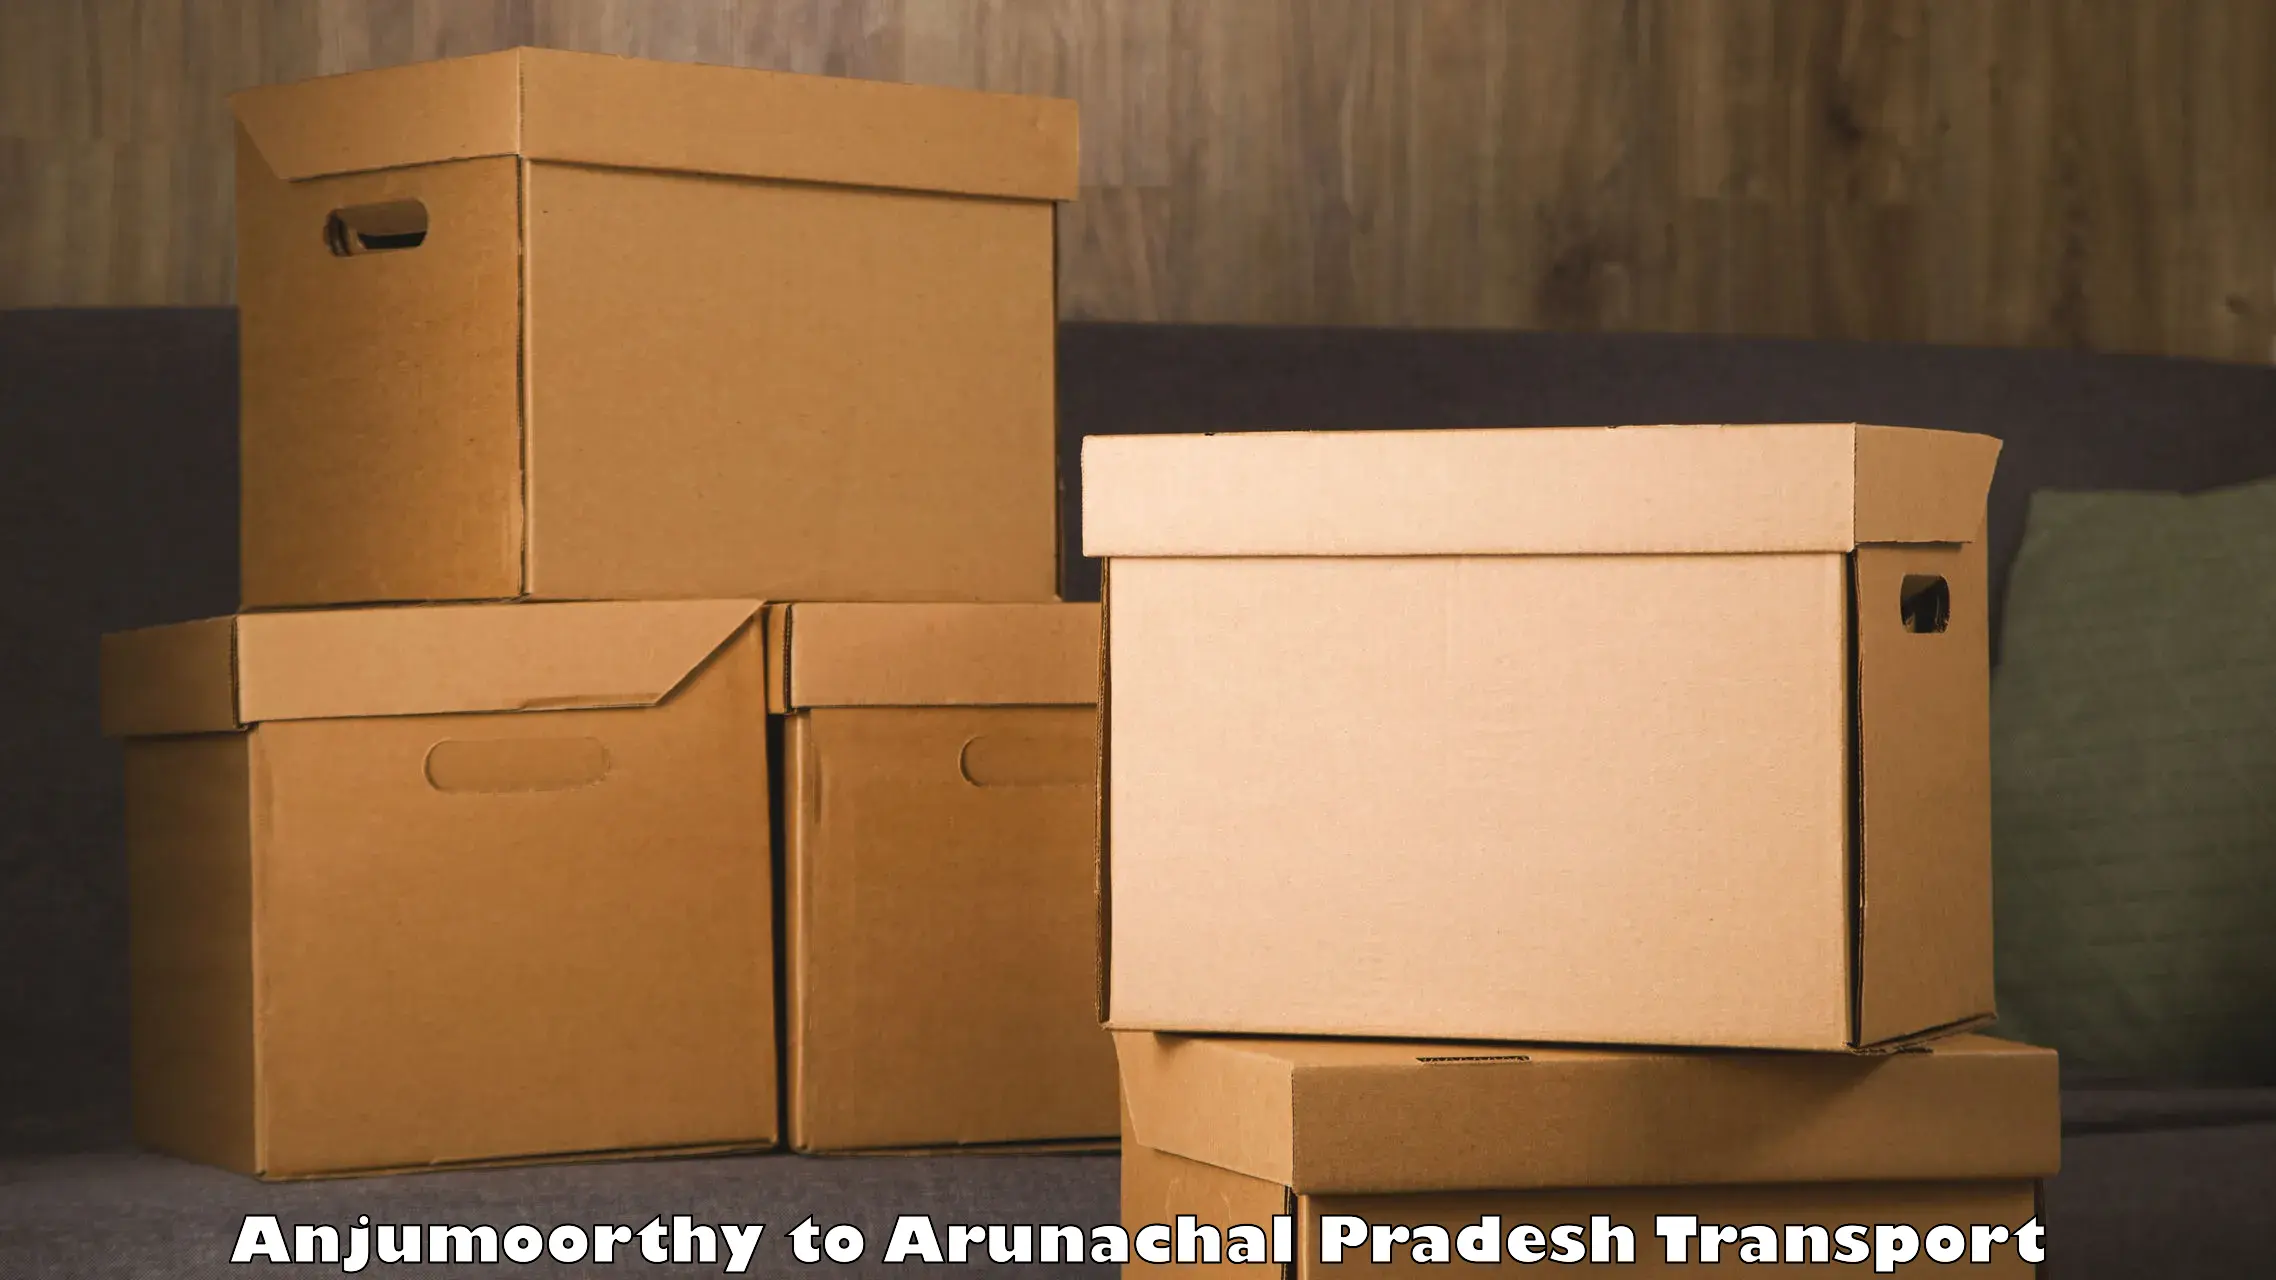 Air freight transport services in Anjumoorthy to Kurung Kumey